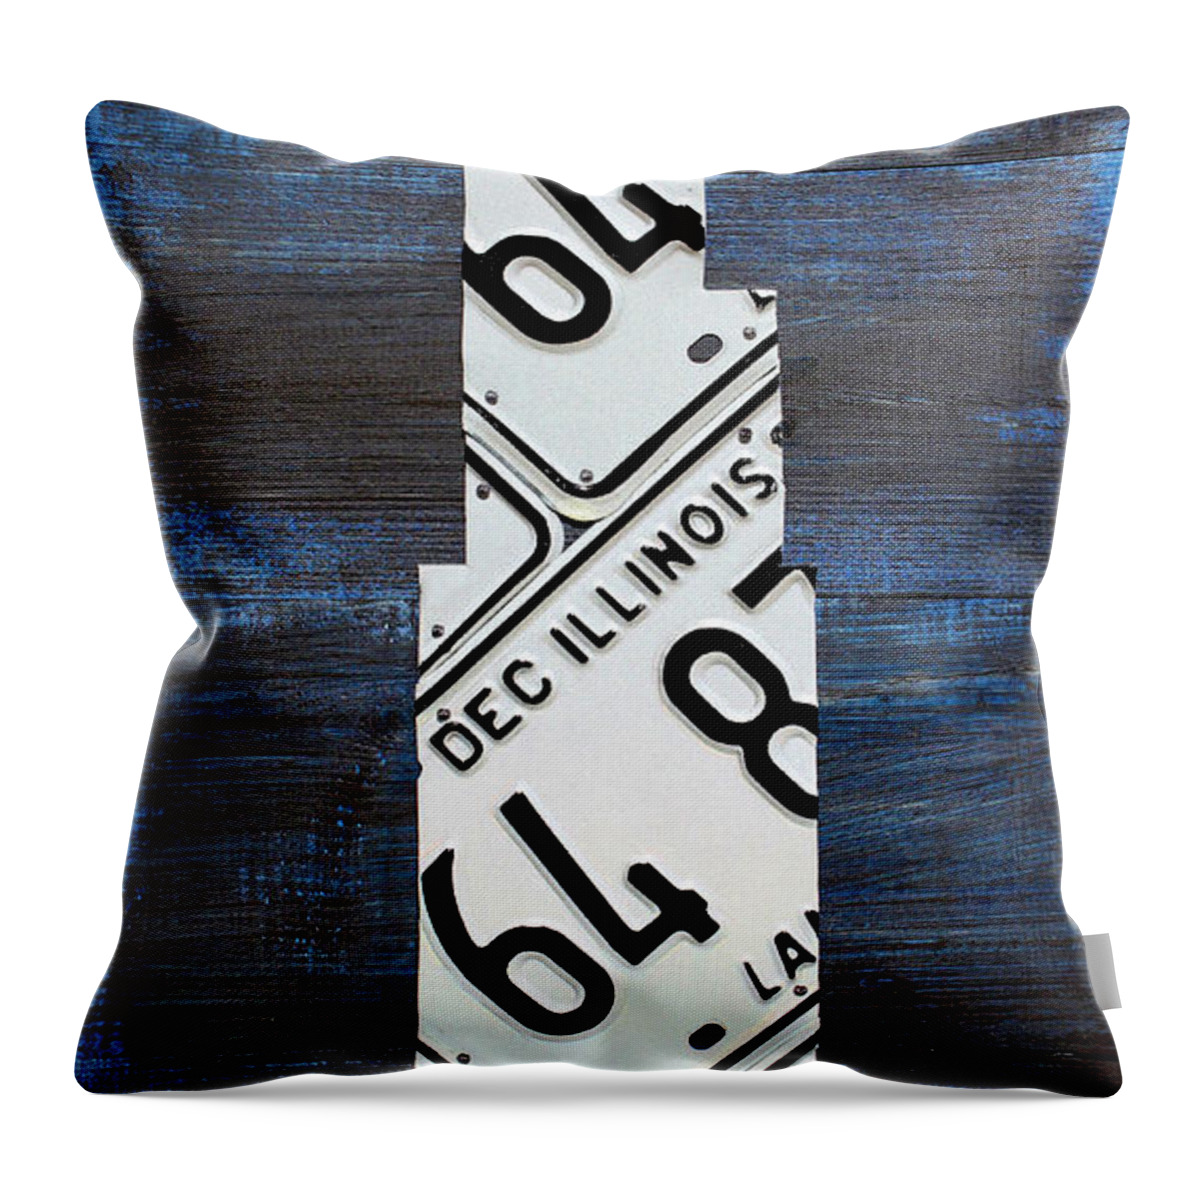 Chicago Throw Pillow featuring the mixed media Chicago Windy City Harris Sears Tower License Plate Art by Design Turnpike